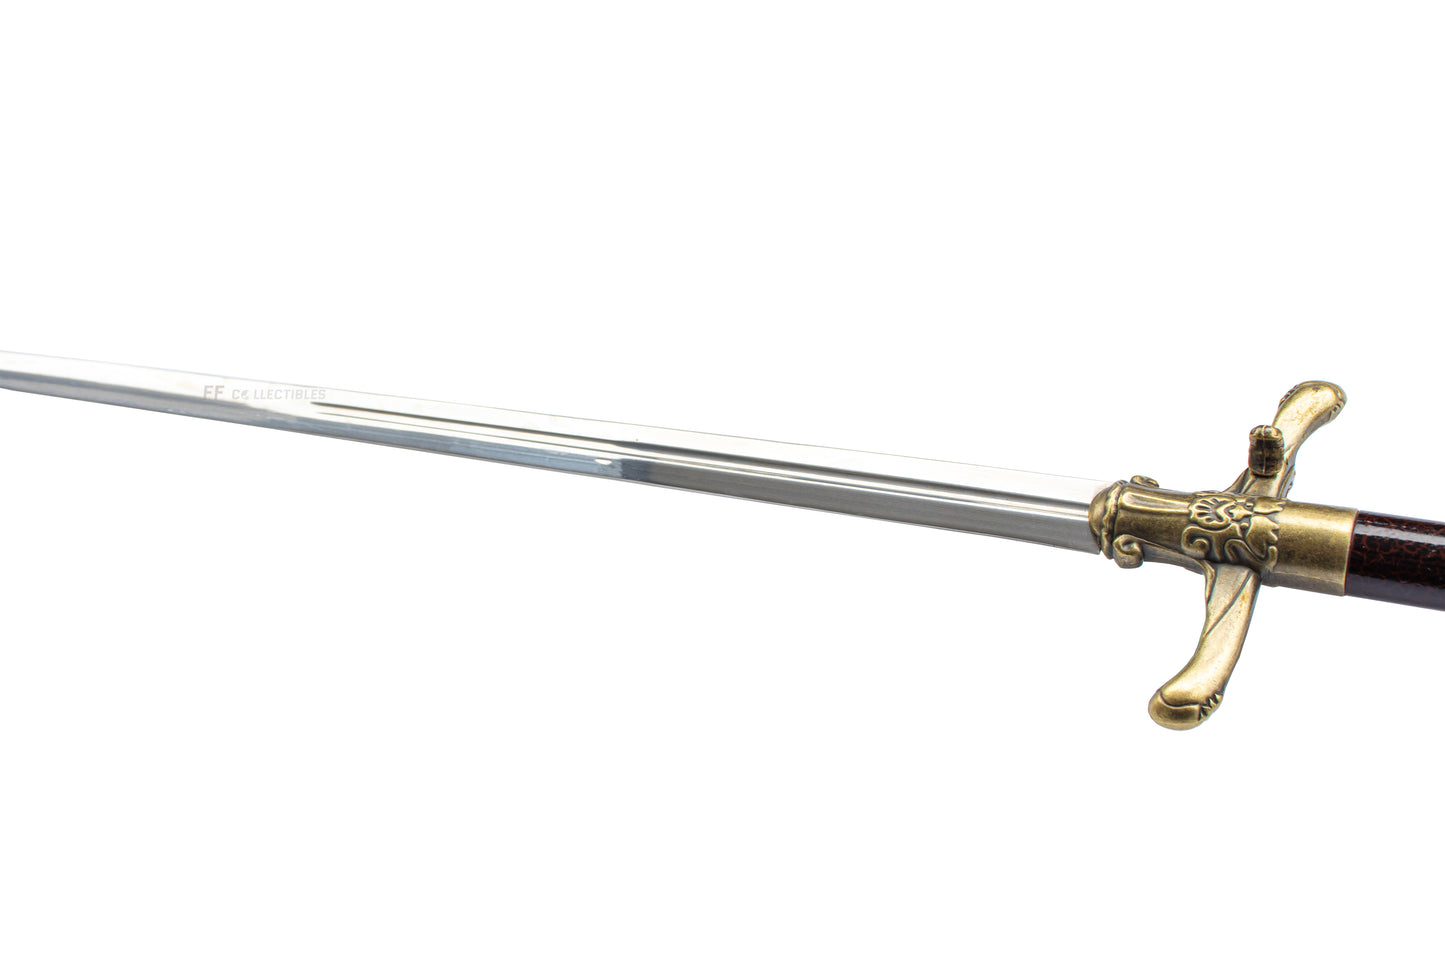 GAME OF THRONES - NEEDLE (HBO), ARYA STARK'S SWORD (with FREE wall plaque)